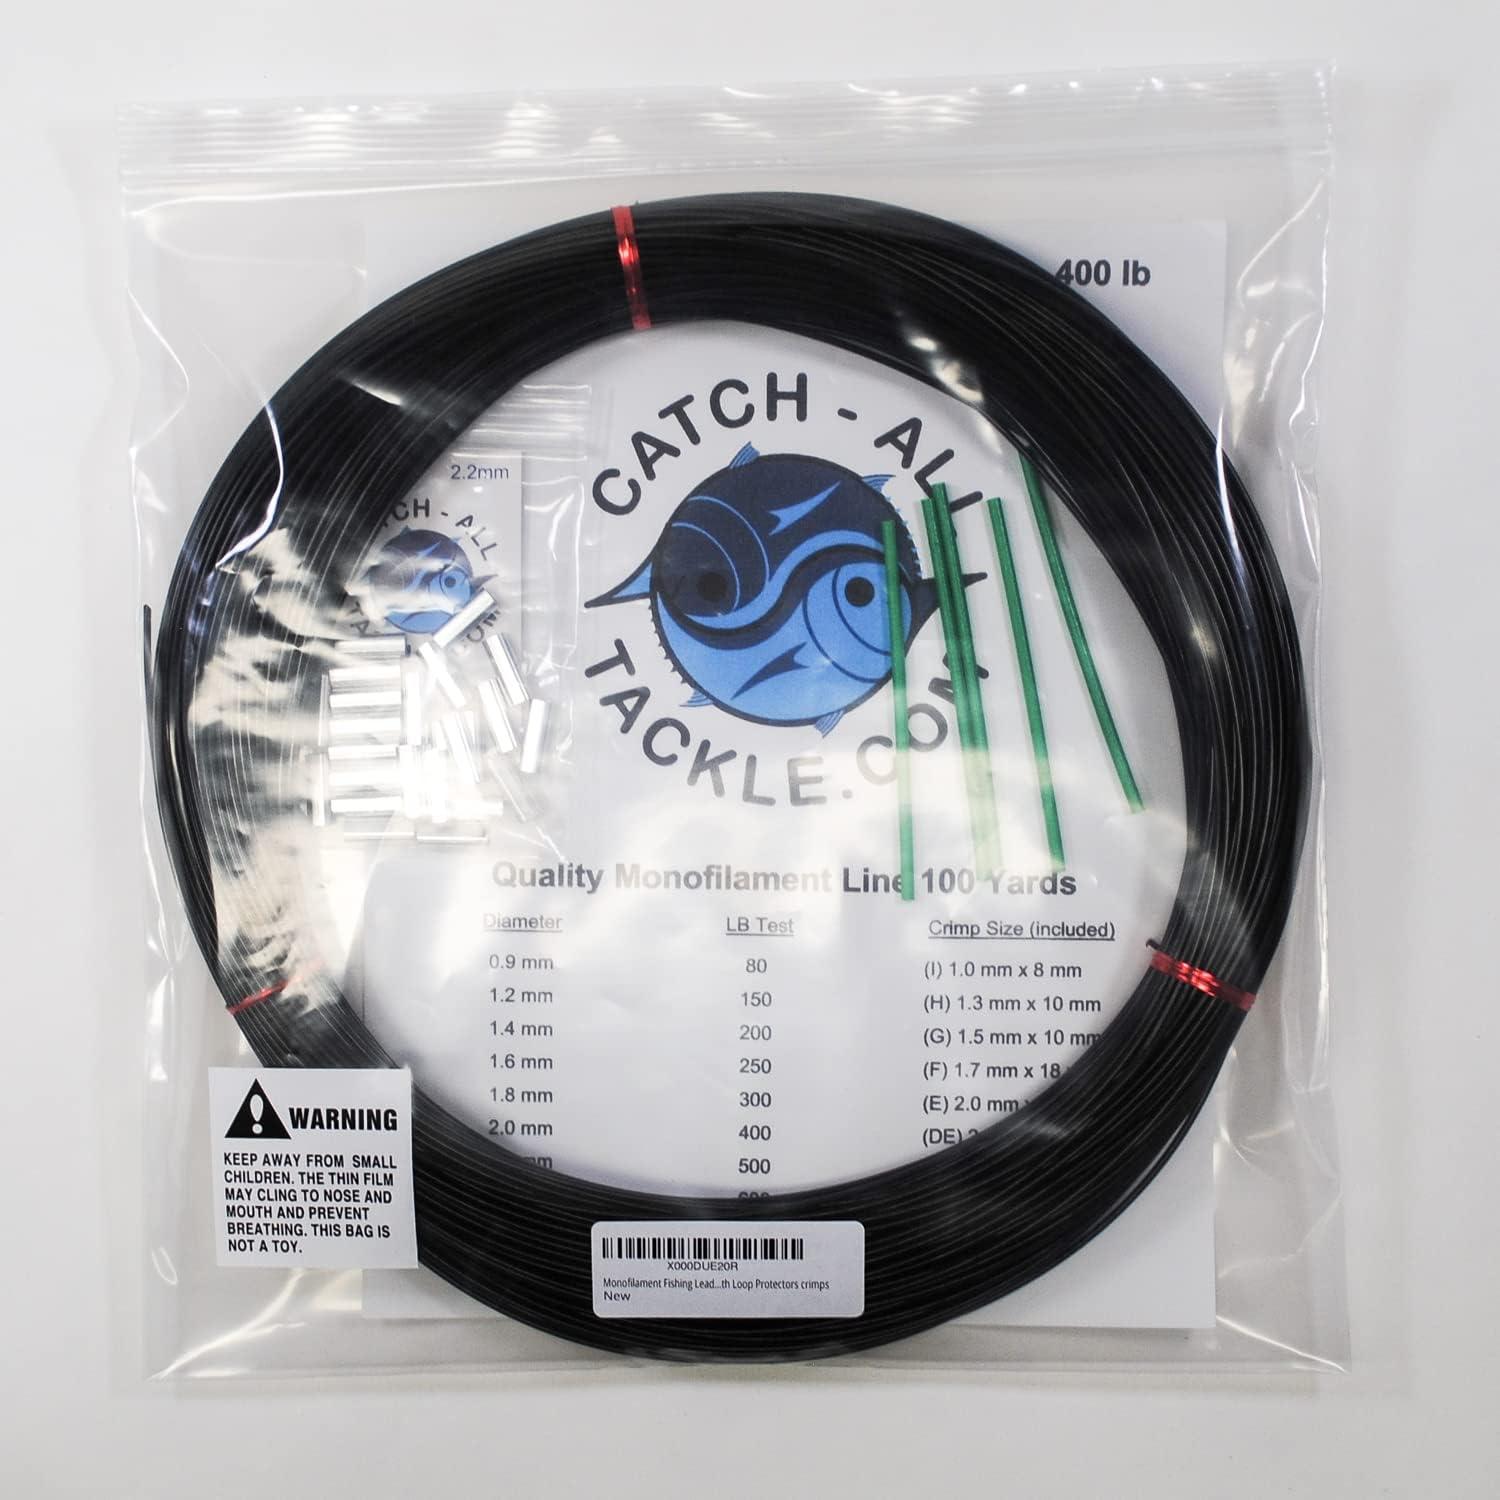 Monofilament Fishing Leader Kit 100yds 2.0mm-400lb Black with Loop